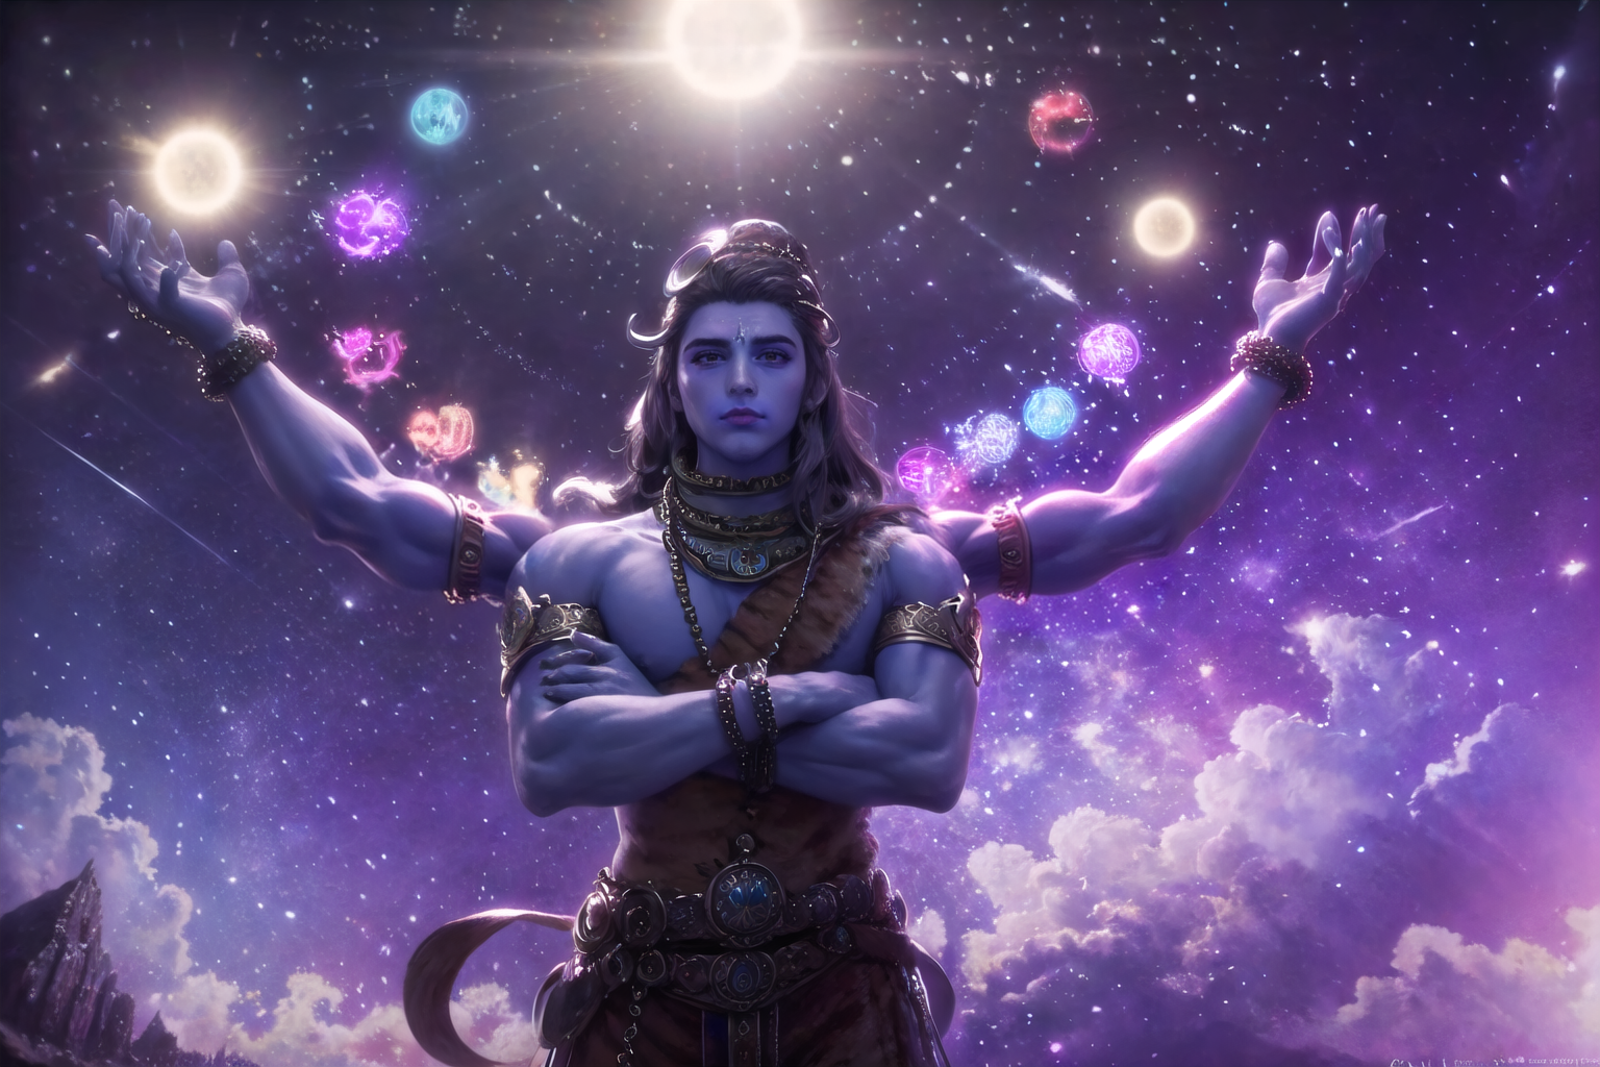 Lord Shiva | reimagined image by wrench1815